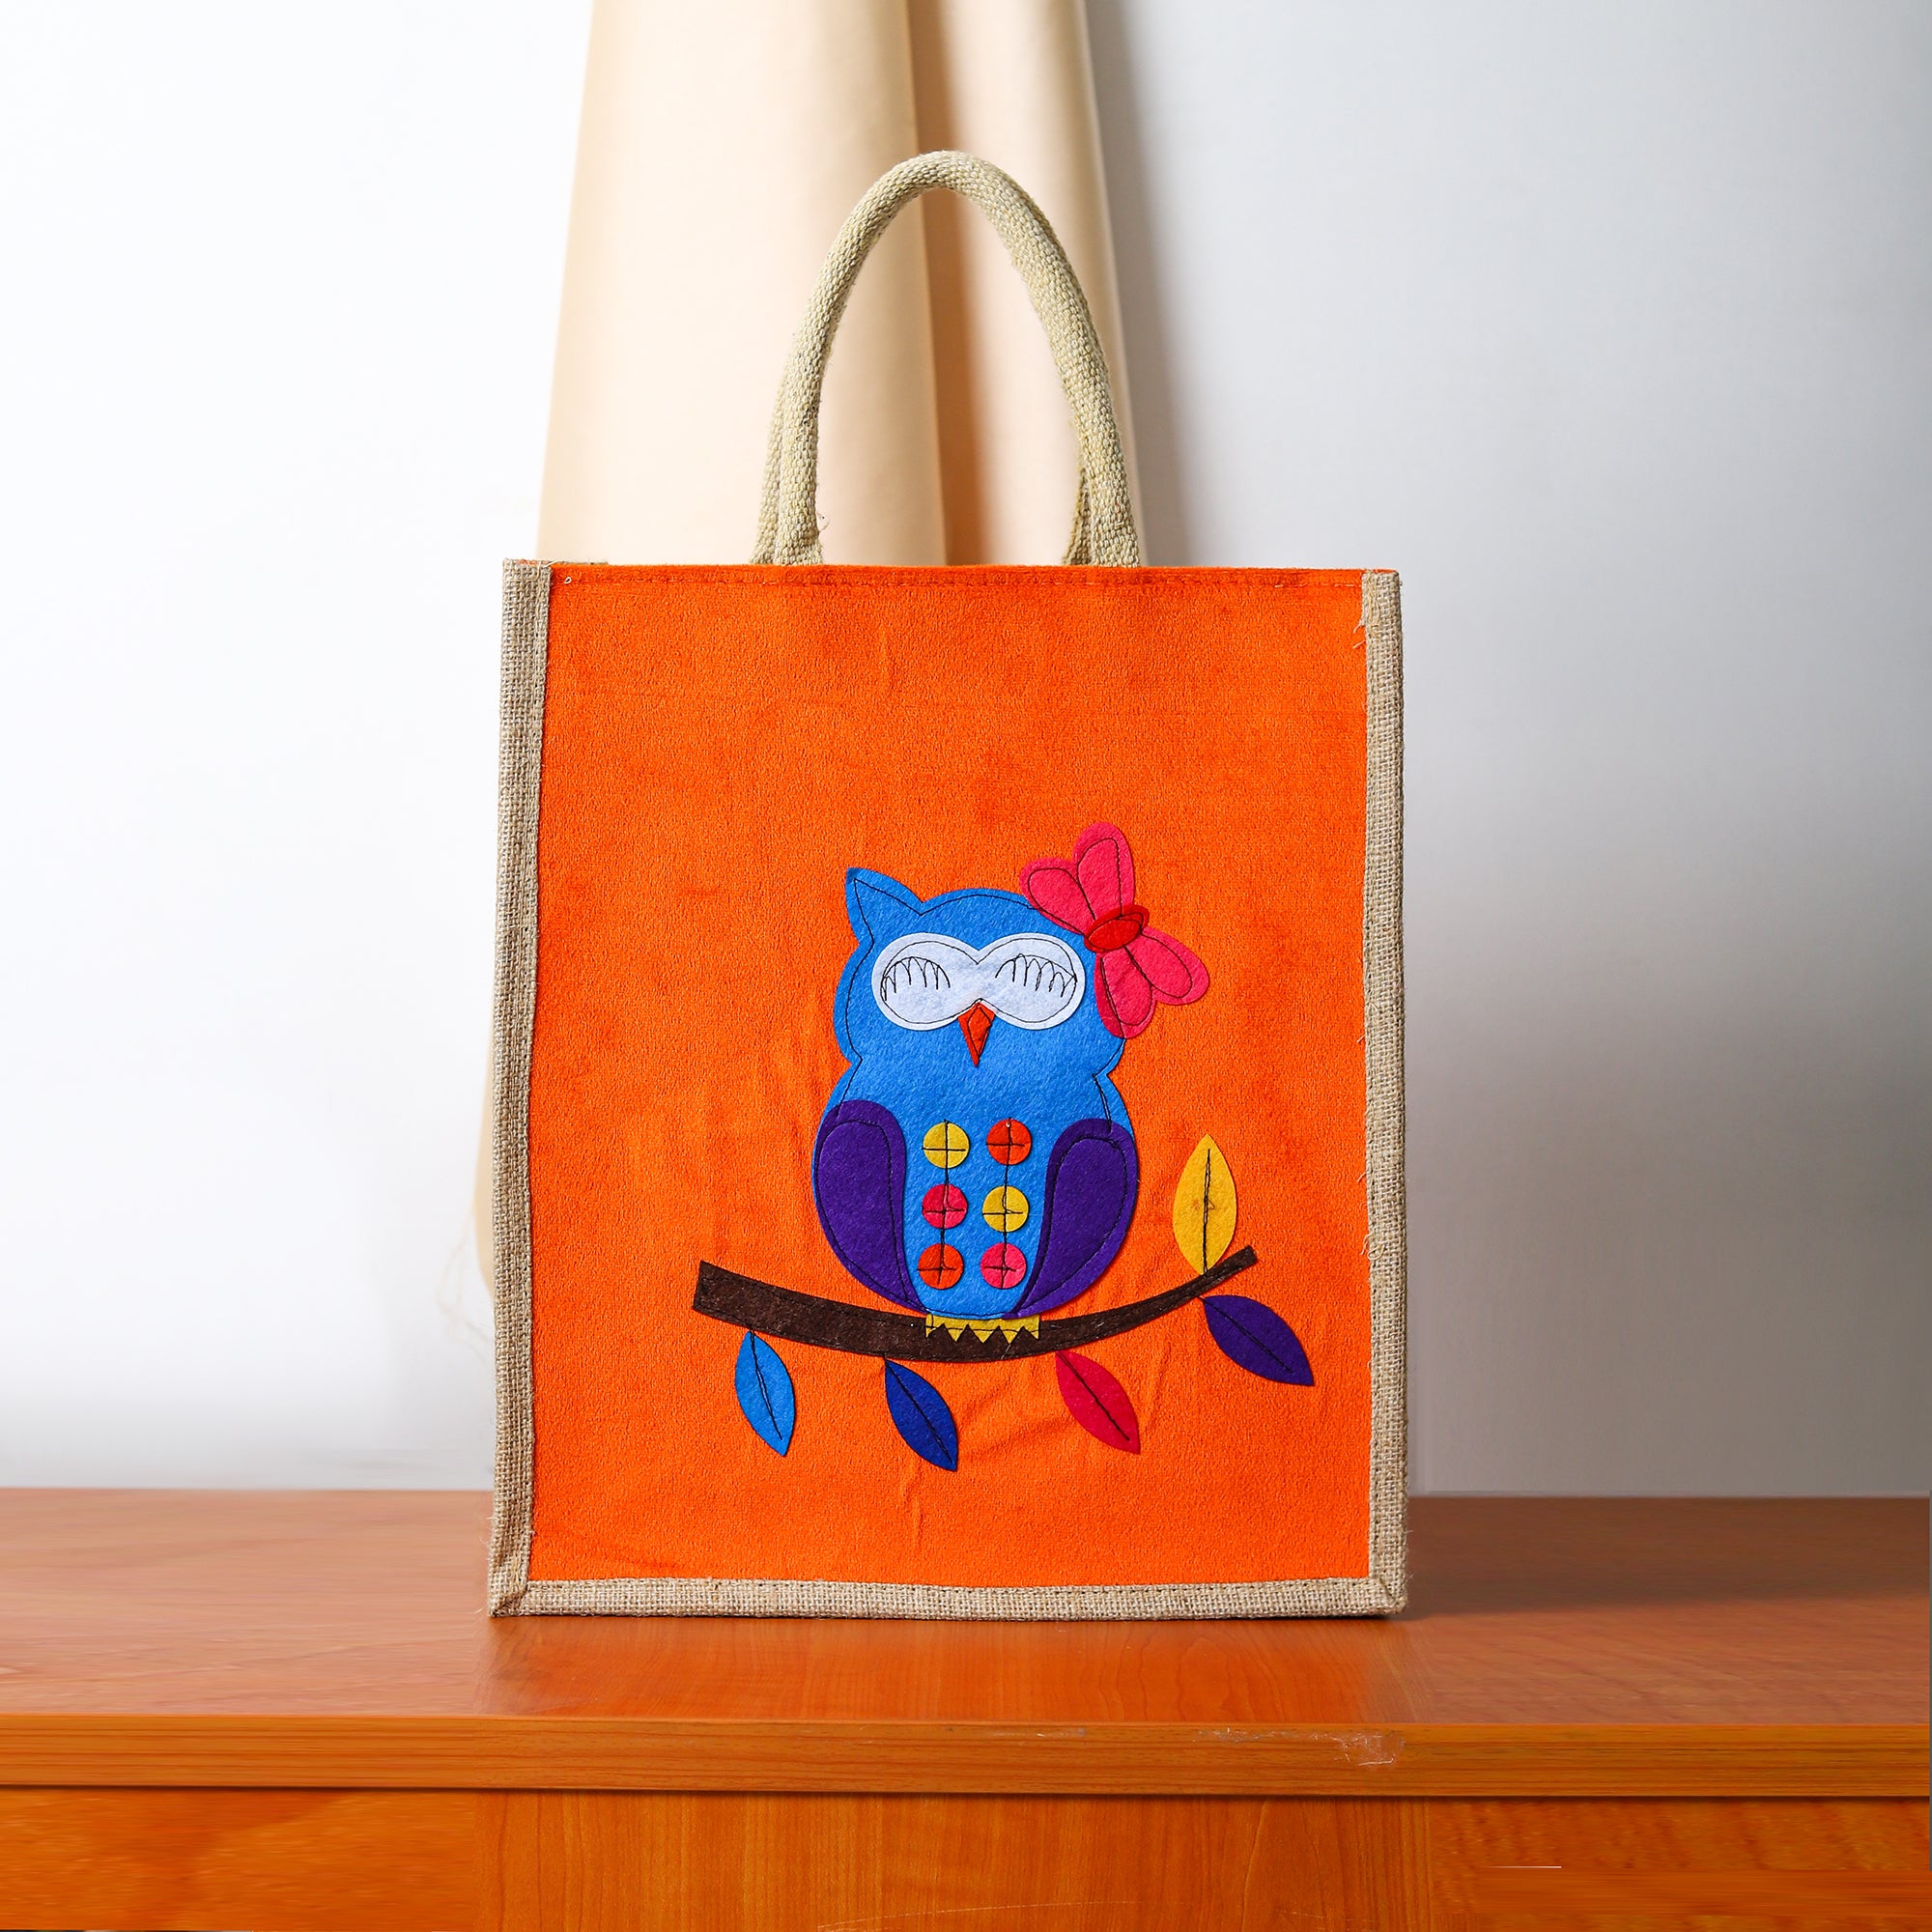 INDHA Sling bag with Exquisite Glass bead Hand-embroidered Owl Motif |  Sling bag | Blue | Maroon - Curated online shop for handcrafted products  made in India by women artisans